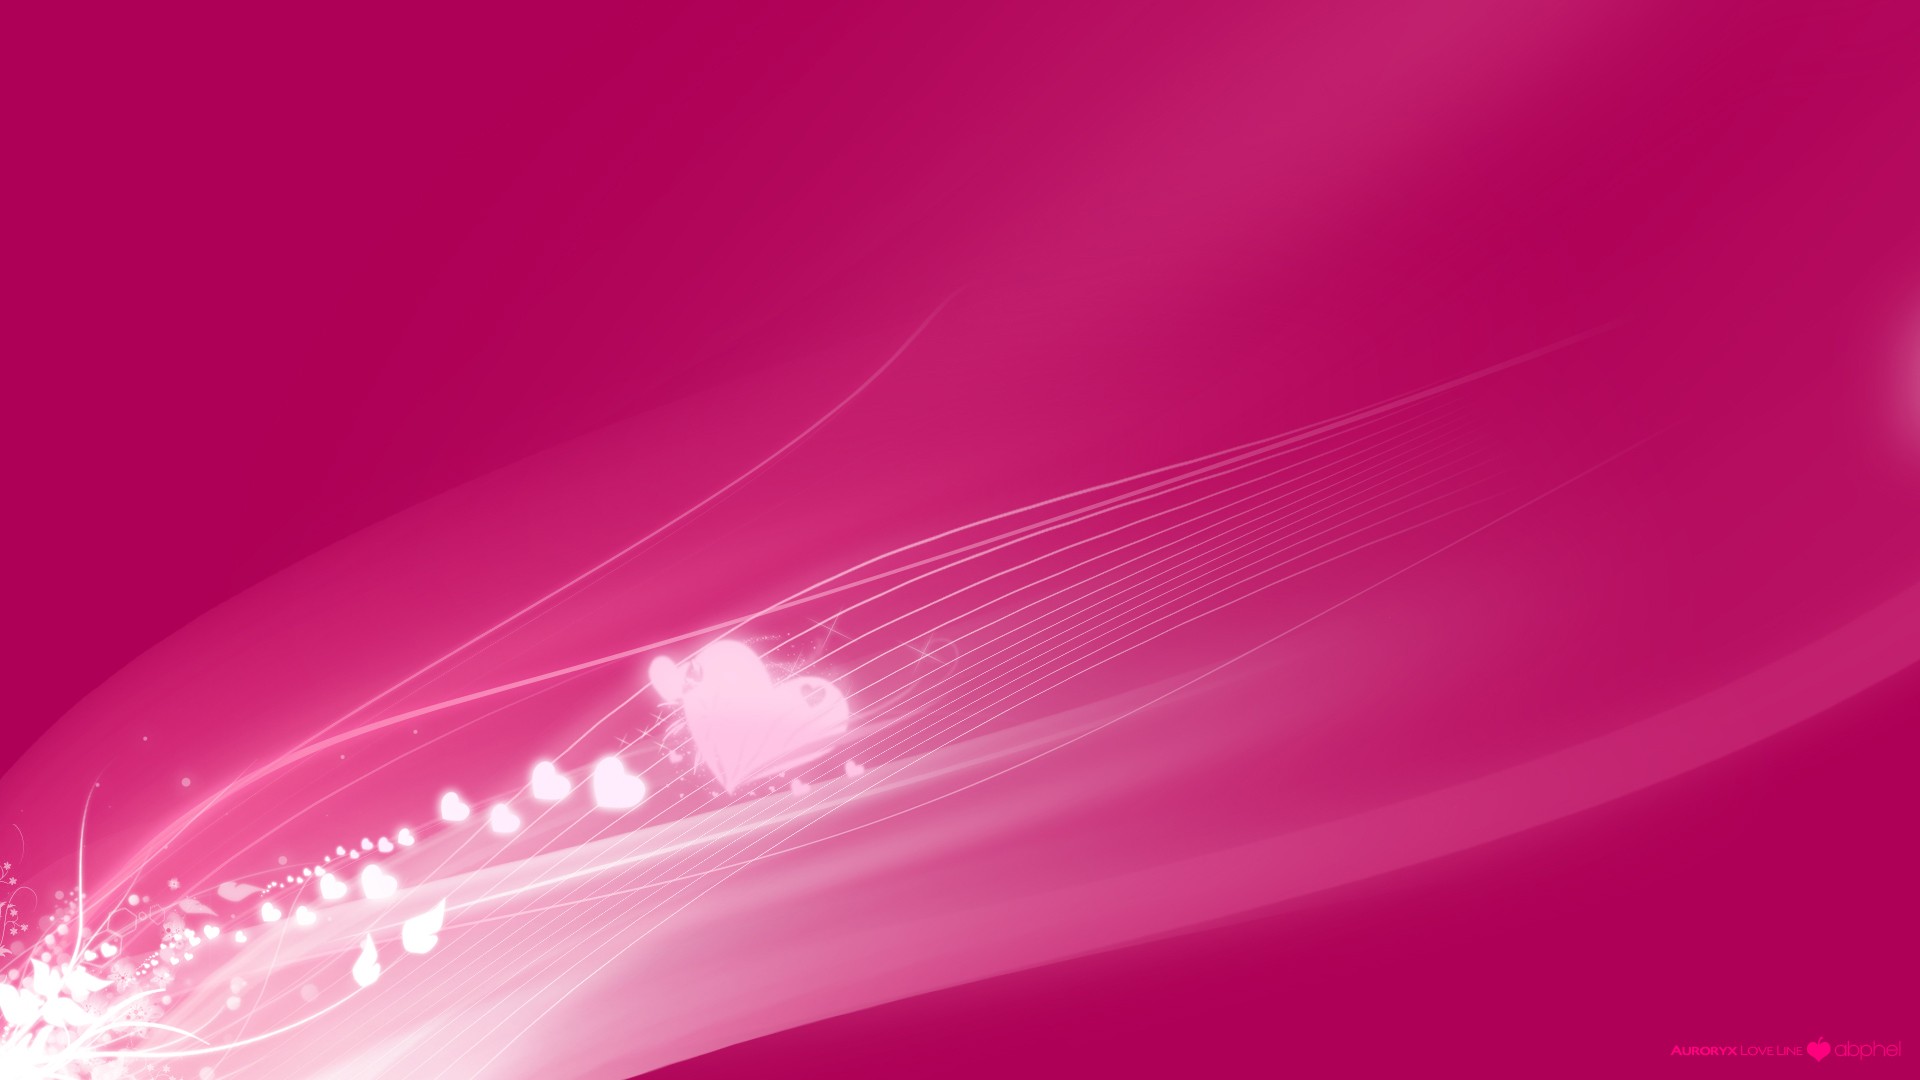 love pink wallpapers wallpaper images 1920x1080